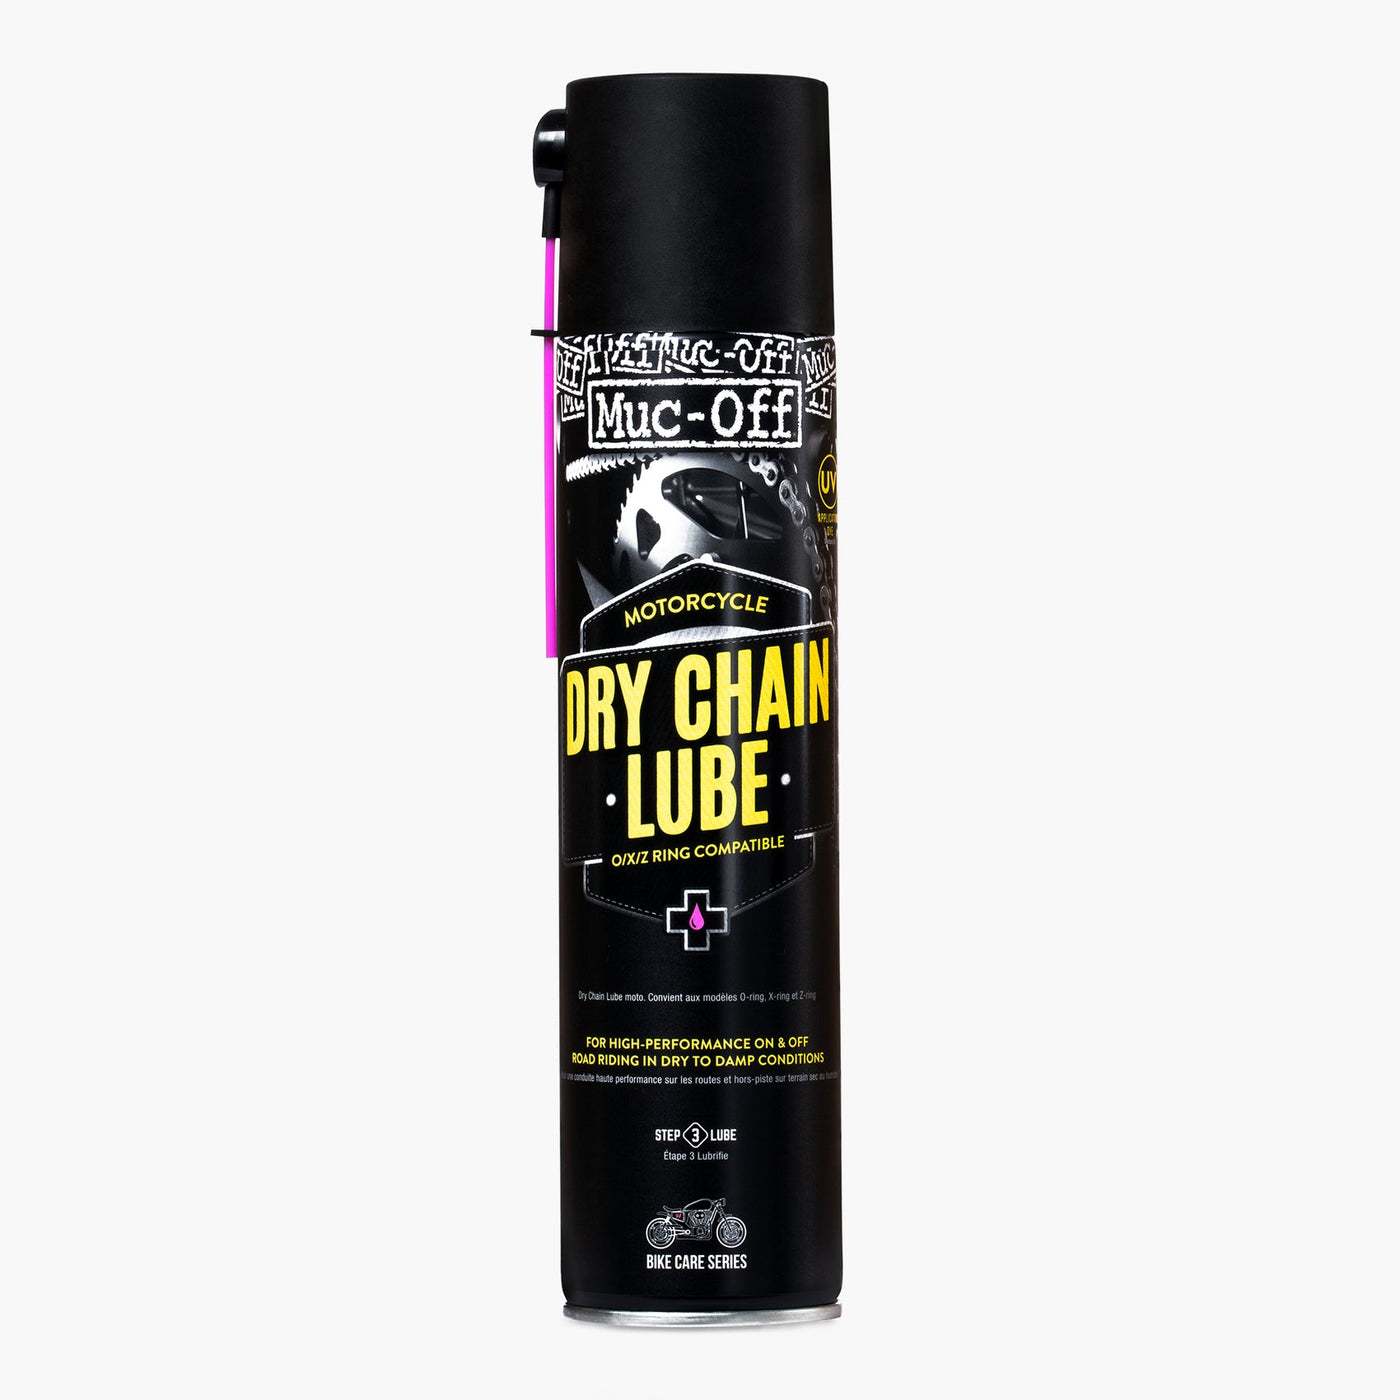 MUC-OFF Motorcycle Dry Weather Chain Lube